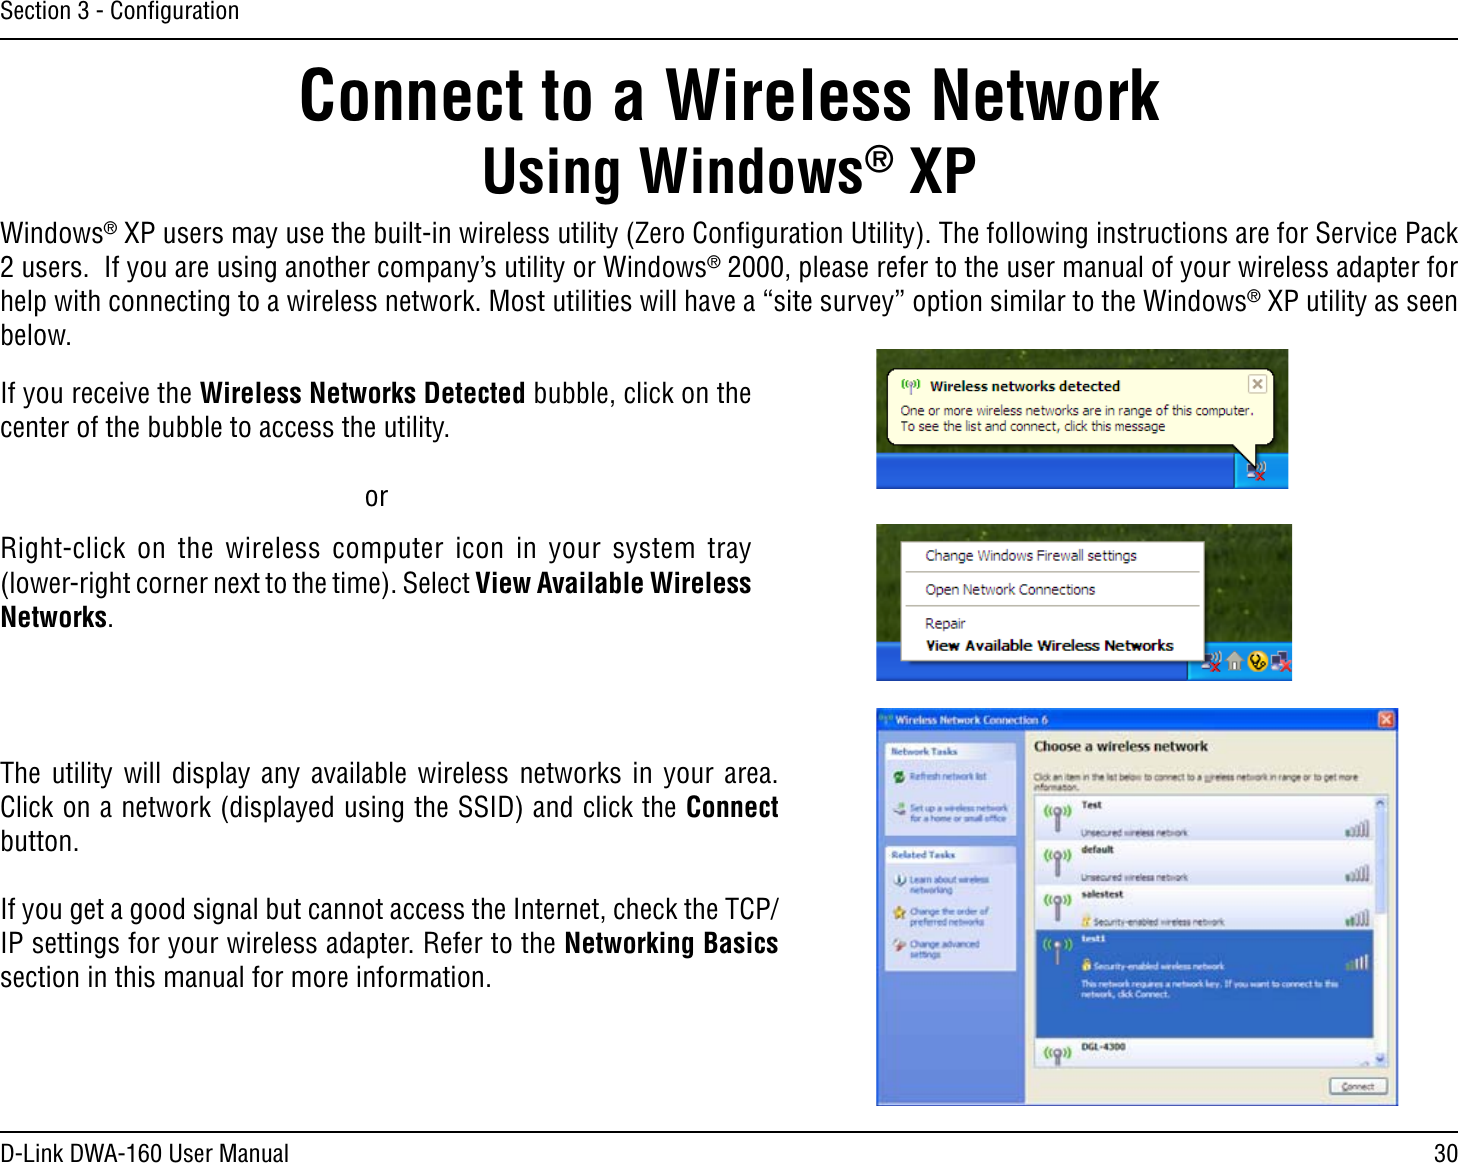 30D-Link DWA-160 User ManualSection 3 - ConﬁgurationConnect to a Wireless NetworkUsing Windows® XPWindows® XP users may use the built-in wireless utility (Zero Conﬁguration Utility). The following instructions are for Service Pack USERS)FYOUAREUSINGANOTHERCOMPANYSUTILITYOR7INDOWS® 2000, please refer to the user manual of your wireless adapter for help with connecting to a wireless network. Most utilities will have a “site survey” option similar to the Windows® XP utility as seen below.Right-click on the wireless computer icon in your system tray (lower-right corner next to the time). Select View Available Wireless Networks.If you receive the Wireless Networks Detected bubble, click on the center of the bubble to access the utility.     orThe utility will display any available wireless networks in your area. Click on a network (displayed using the SSID) and click the Connect button.If you get a good signal but cannot access the Internet, check the TCP/IP settings for your wireless adapter. Refer to the Networking Basics section in this manual for more information.